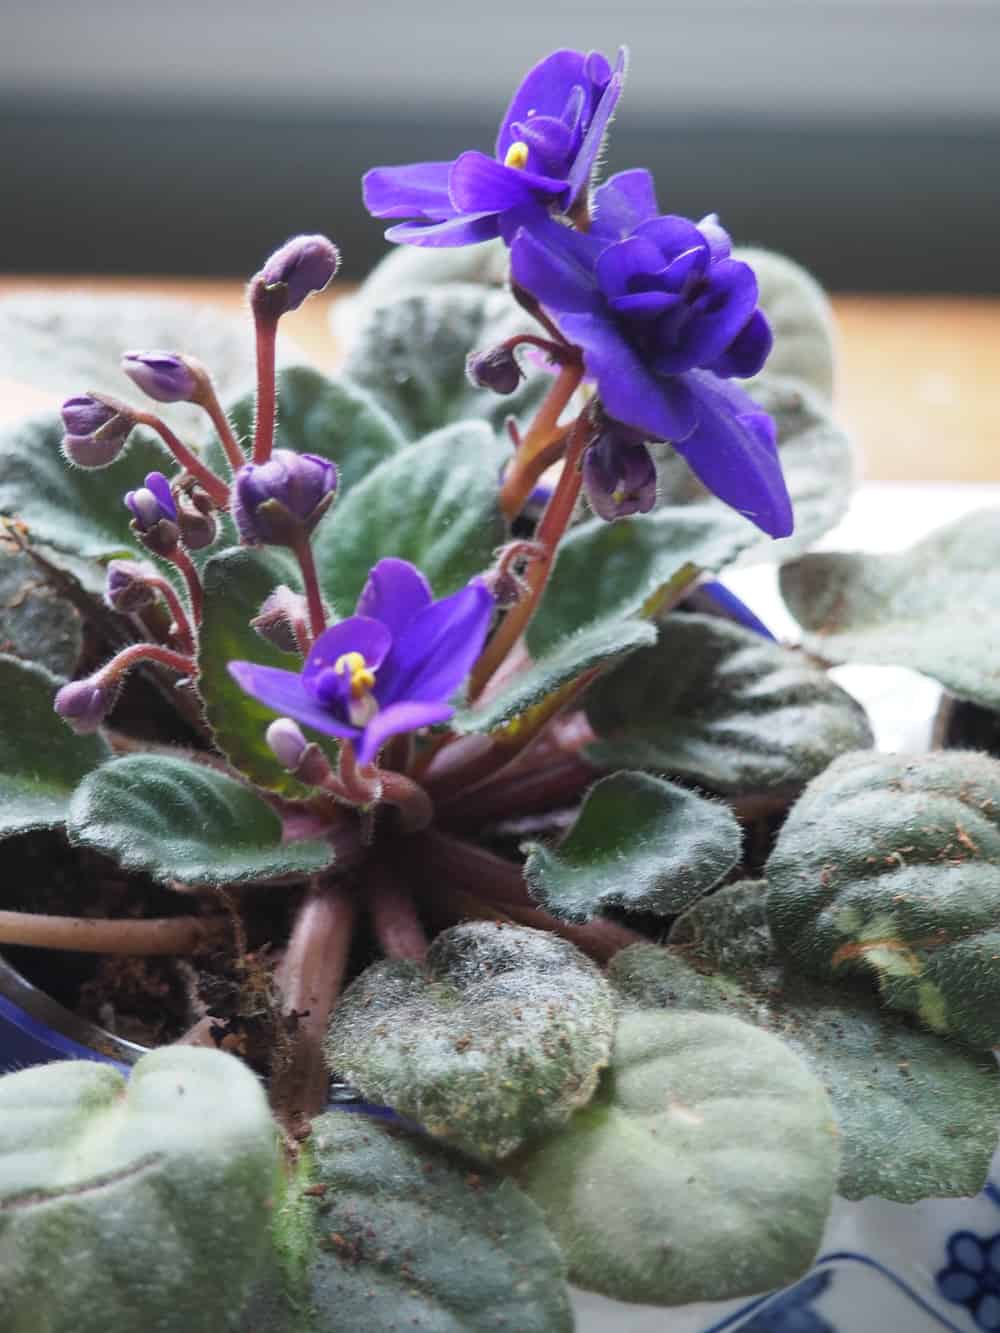 Offering plant care advice on how to help your African Violets bloom every week! | via Autumn All Along